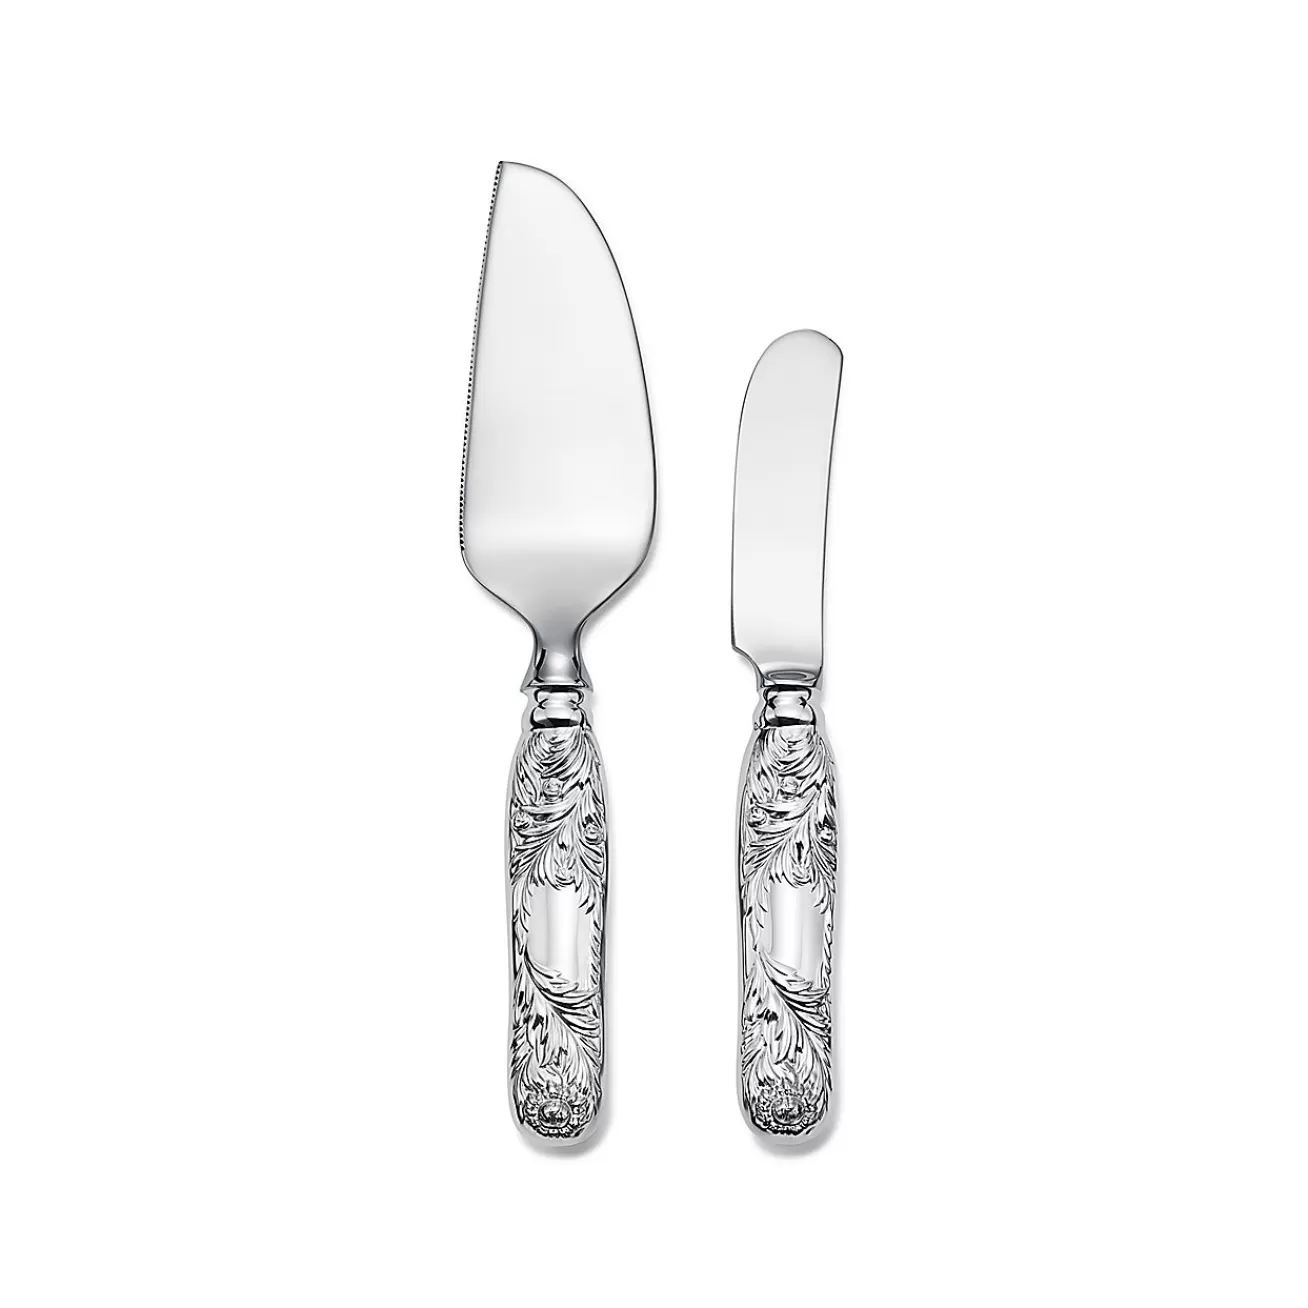 Tiffany & Co. Chrysanthemum cheese knife and server in sterling silver. | ^ The Couple | Wedding Gifts